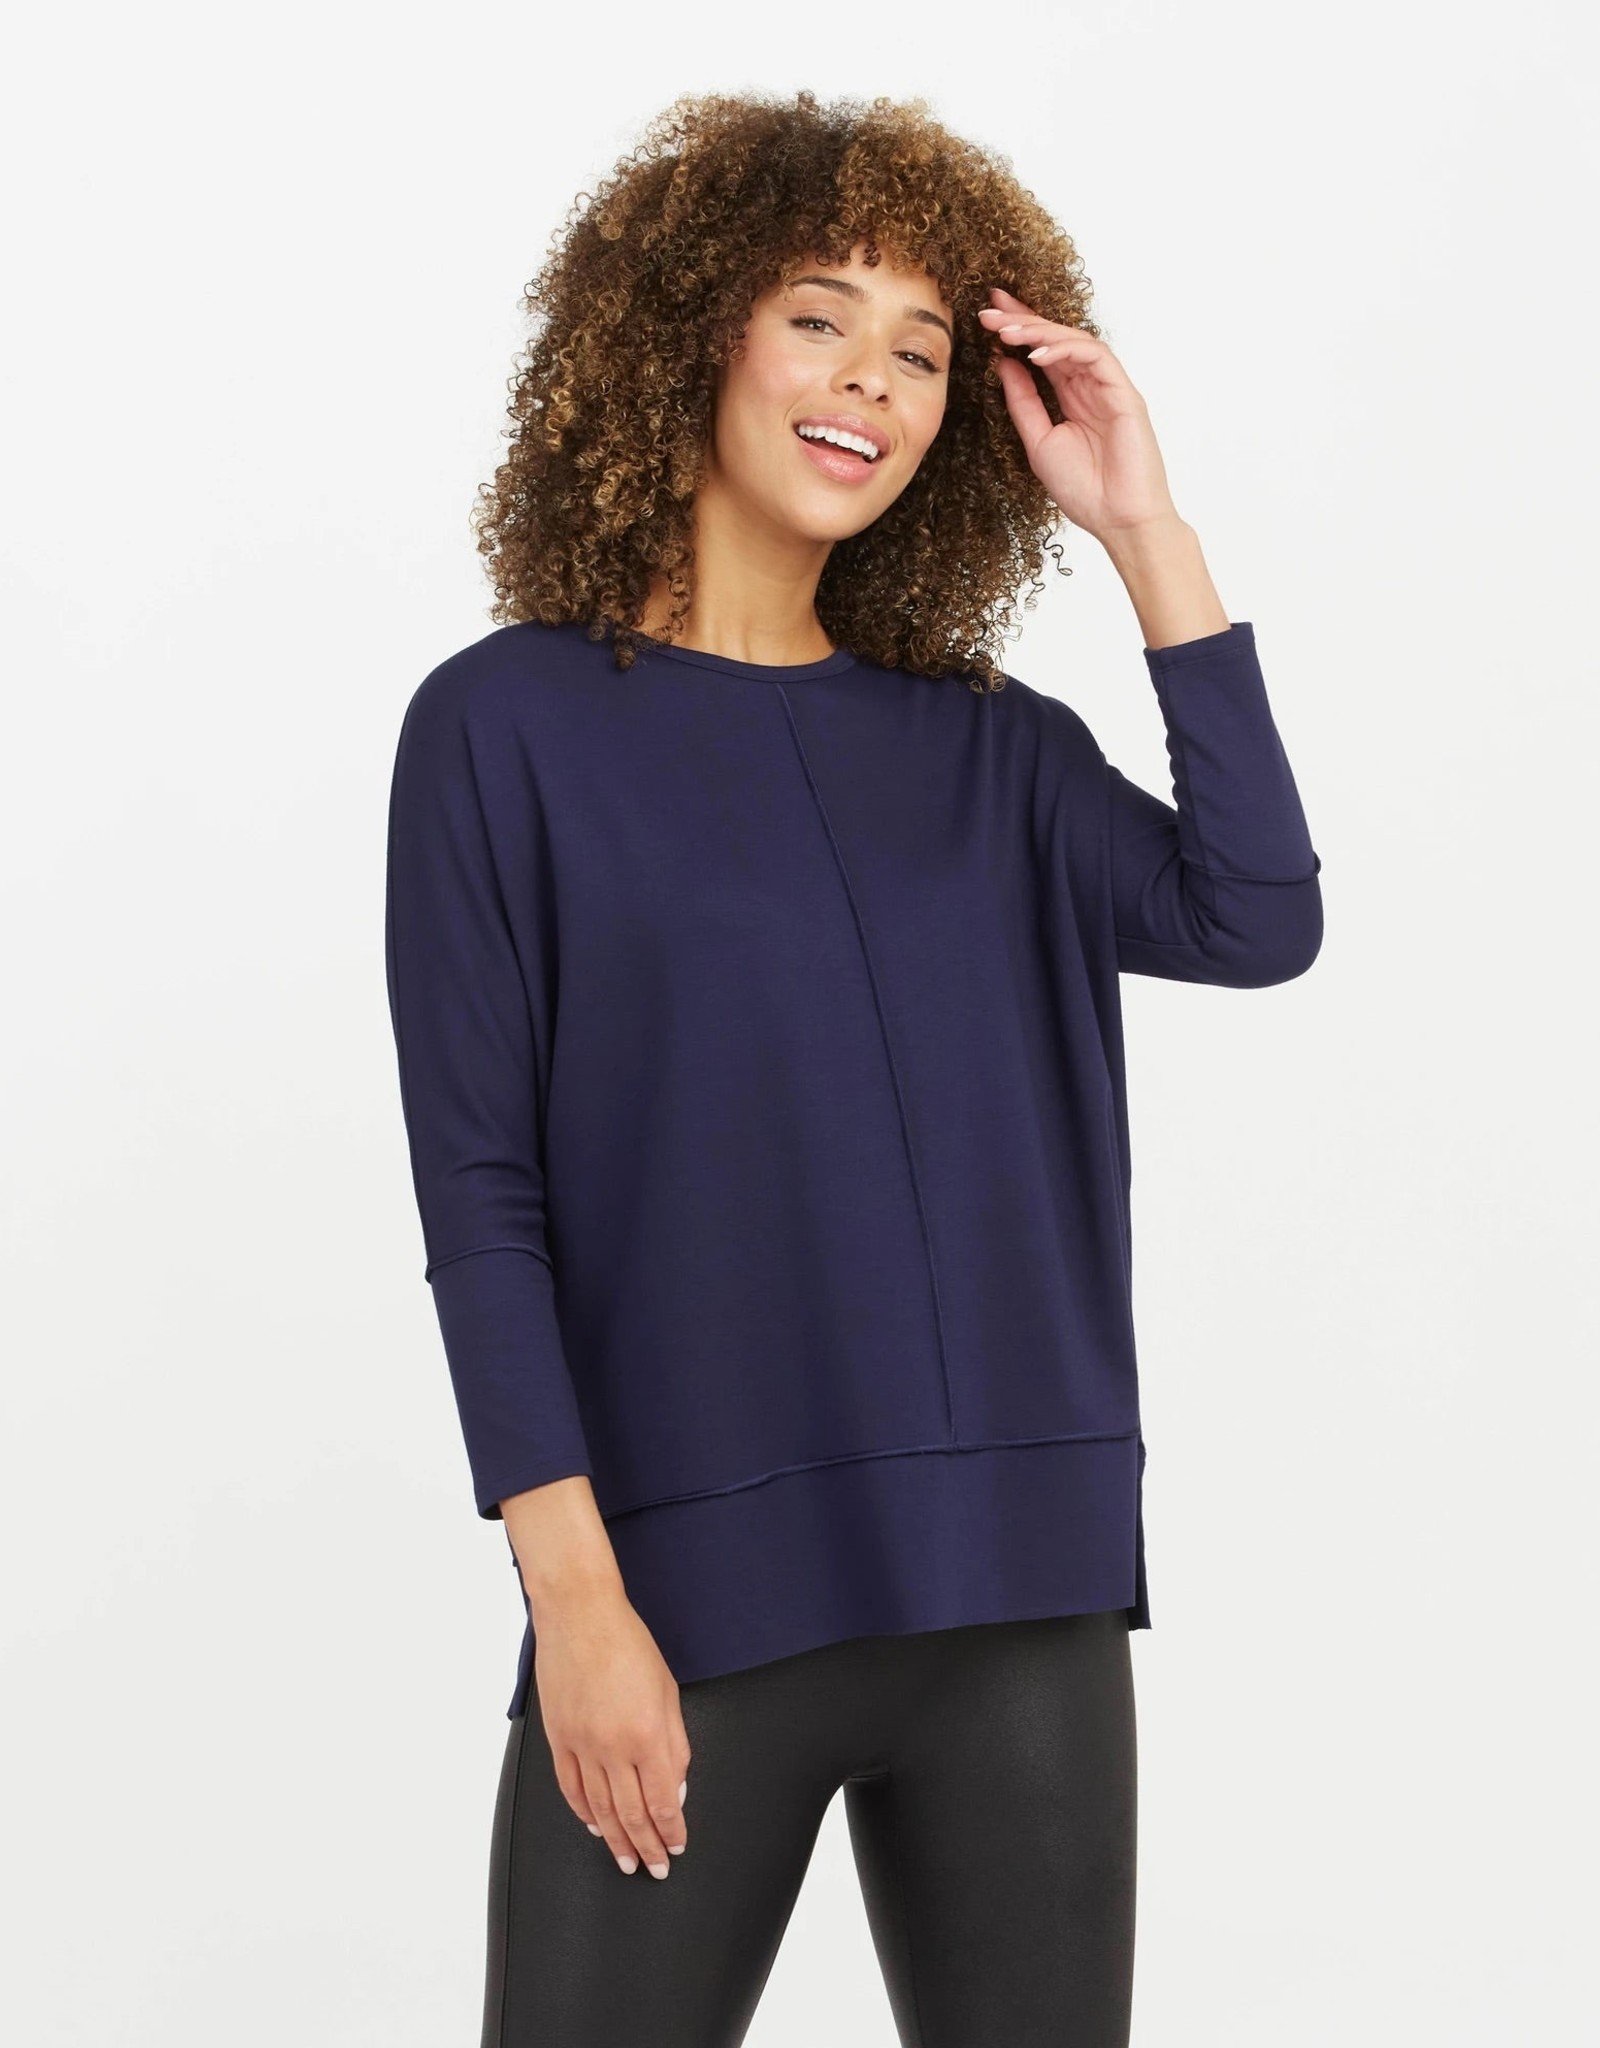 Spanx Perfect Length Top, Dolman 3/4 Sleeves